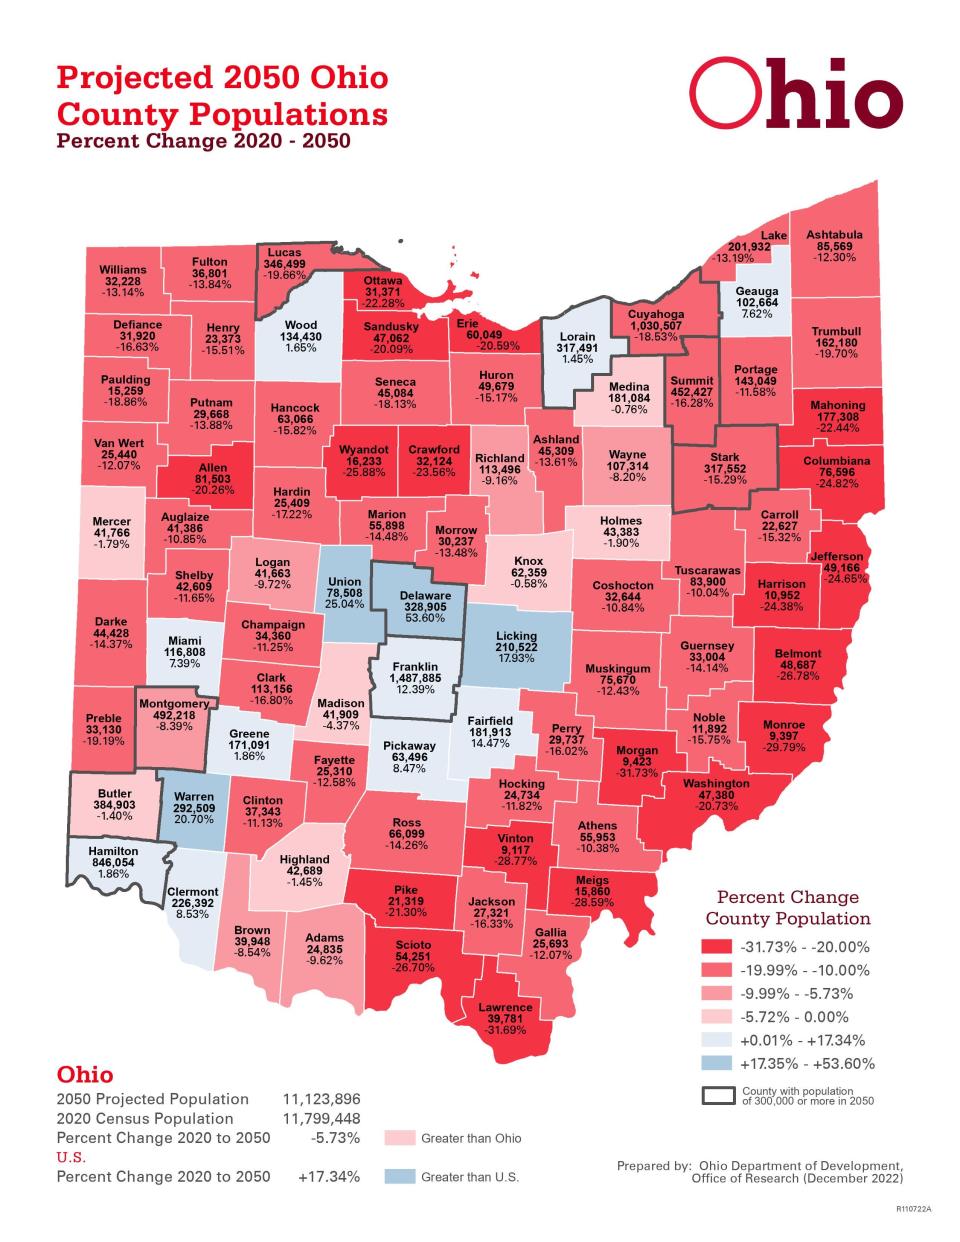 A map of Ohio's projected population by county in 2050.